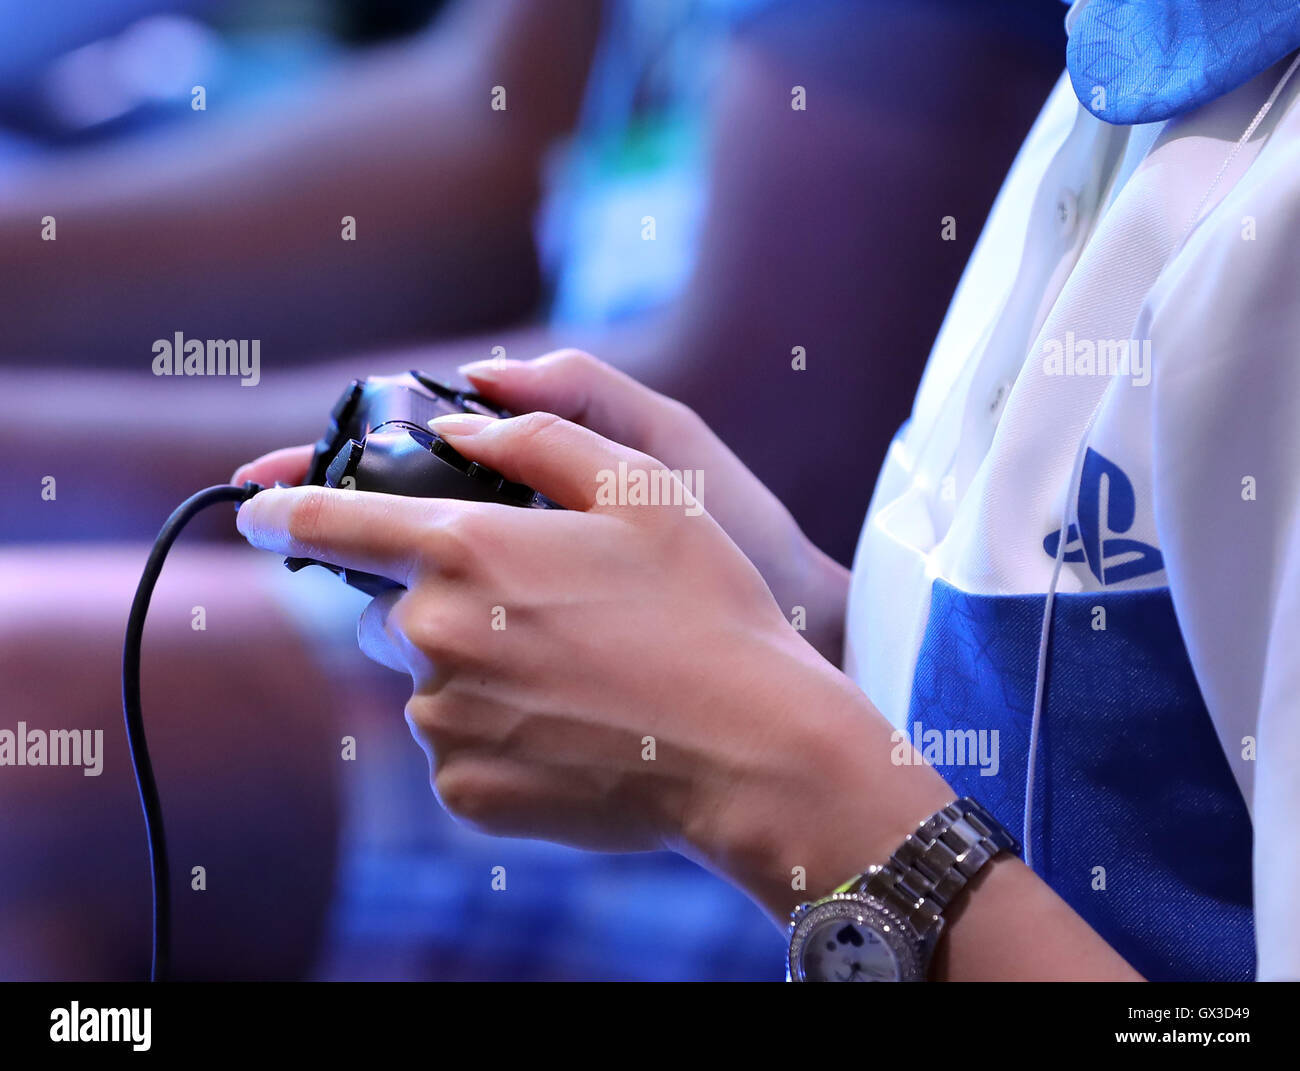 Thursday. 15th Sep, 2016. A visitor tries to play a videogame with Sony Interactive Entertainment's PlayStation 4 at the annual Tokyo Game Show in Chiba, suburban Tokyo on Thursday, September 15, 2016. The 20th anniversary Show includes show a new Virtual Reality (VR) area. The event hosts 614 exhibitors from 37 different countries and runs from September 15 to 18 at the International Convention Complex Makuhari Messe in Chiba. 1,523 game titles for smartphones, games consoles, PC and VR platforms are on show. Credit:  Yoshio Tsunoda/AFLO/Alamy Live News Stock Photo